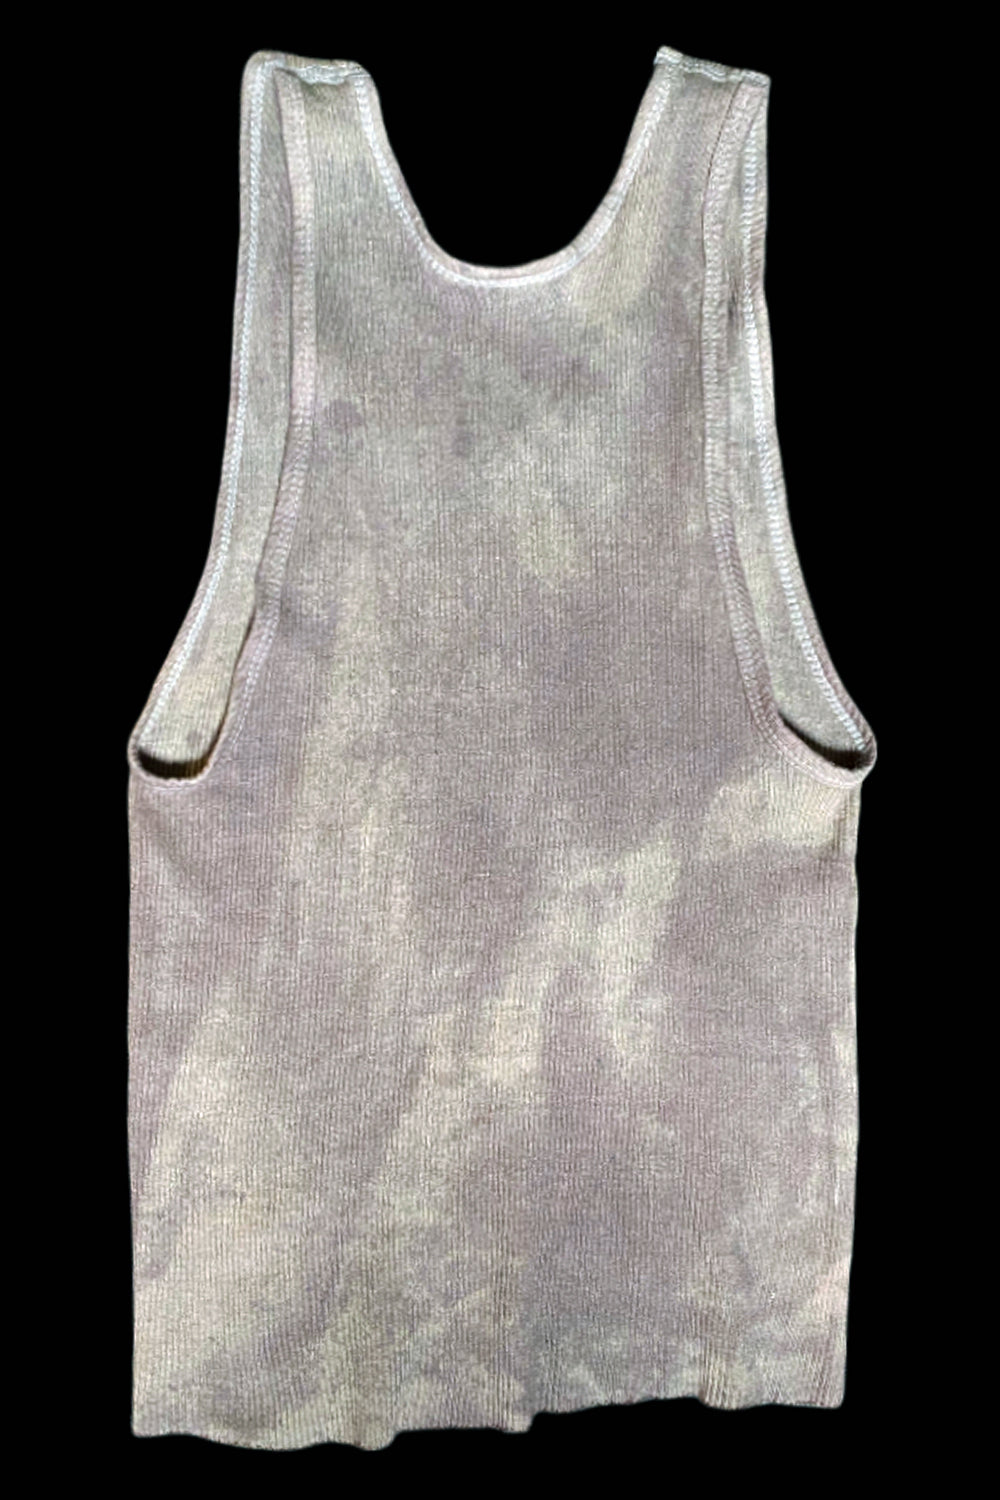 BITEBACK Wanna Be Your Dog on Hand-Dyed Tank | Small